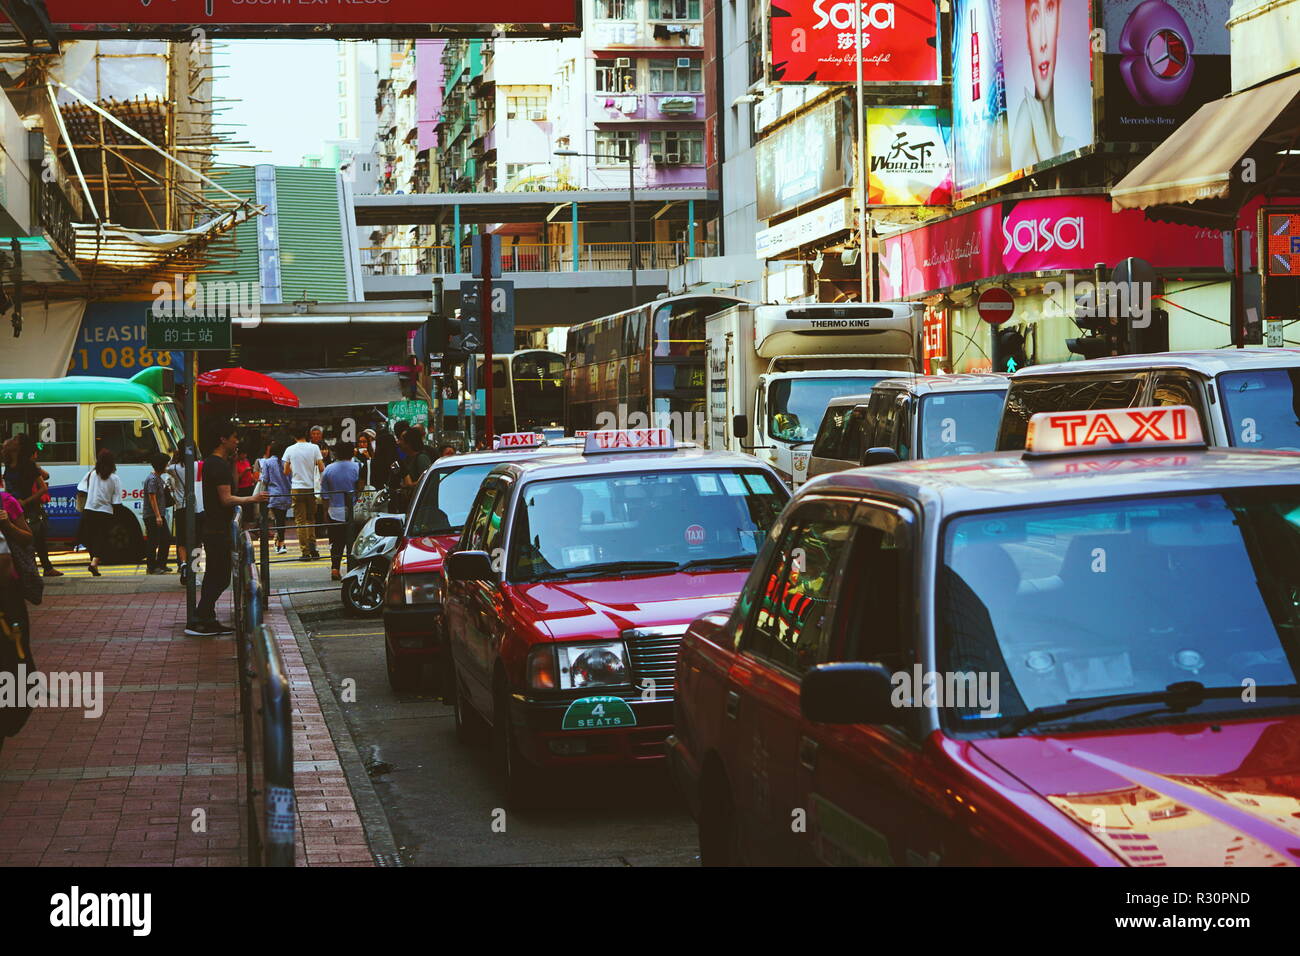 Taxis wait for customers at taxi stand. Mong Kok, Hong Kong. Stock Photo